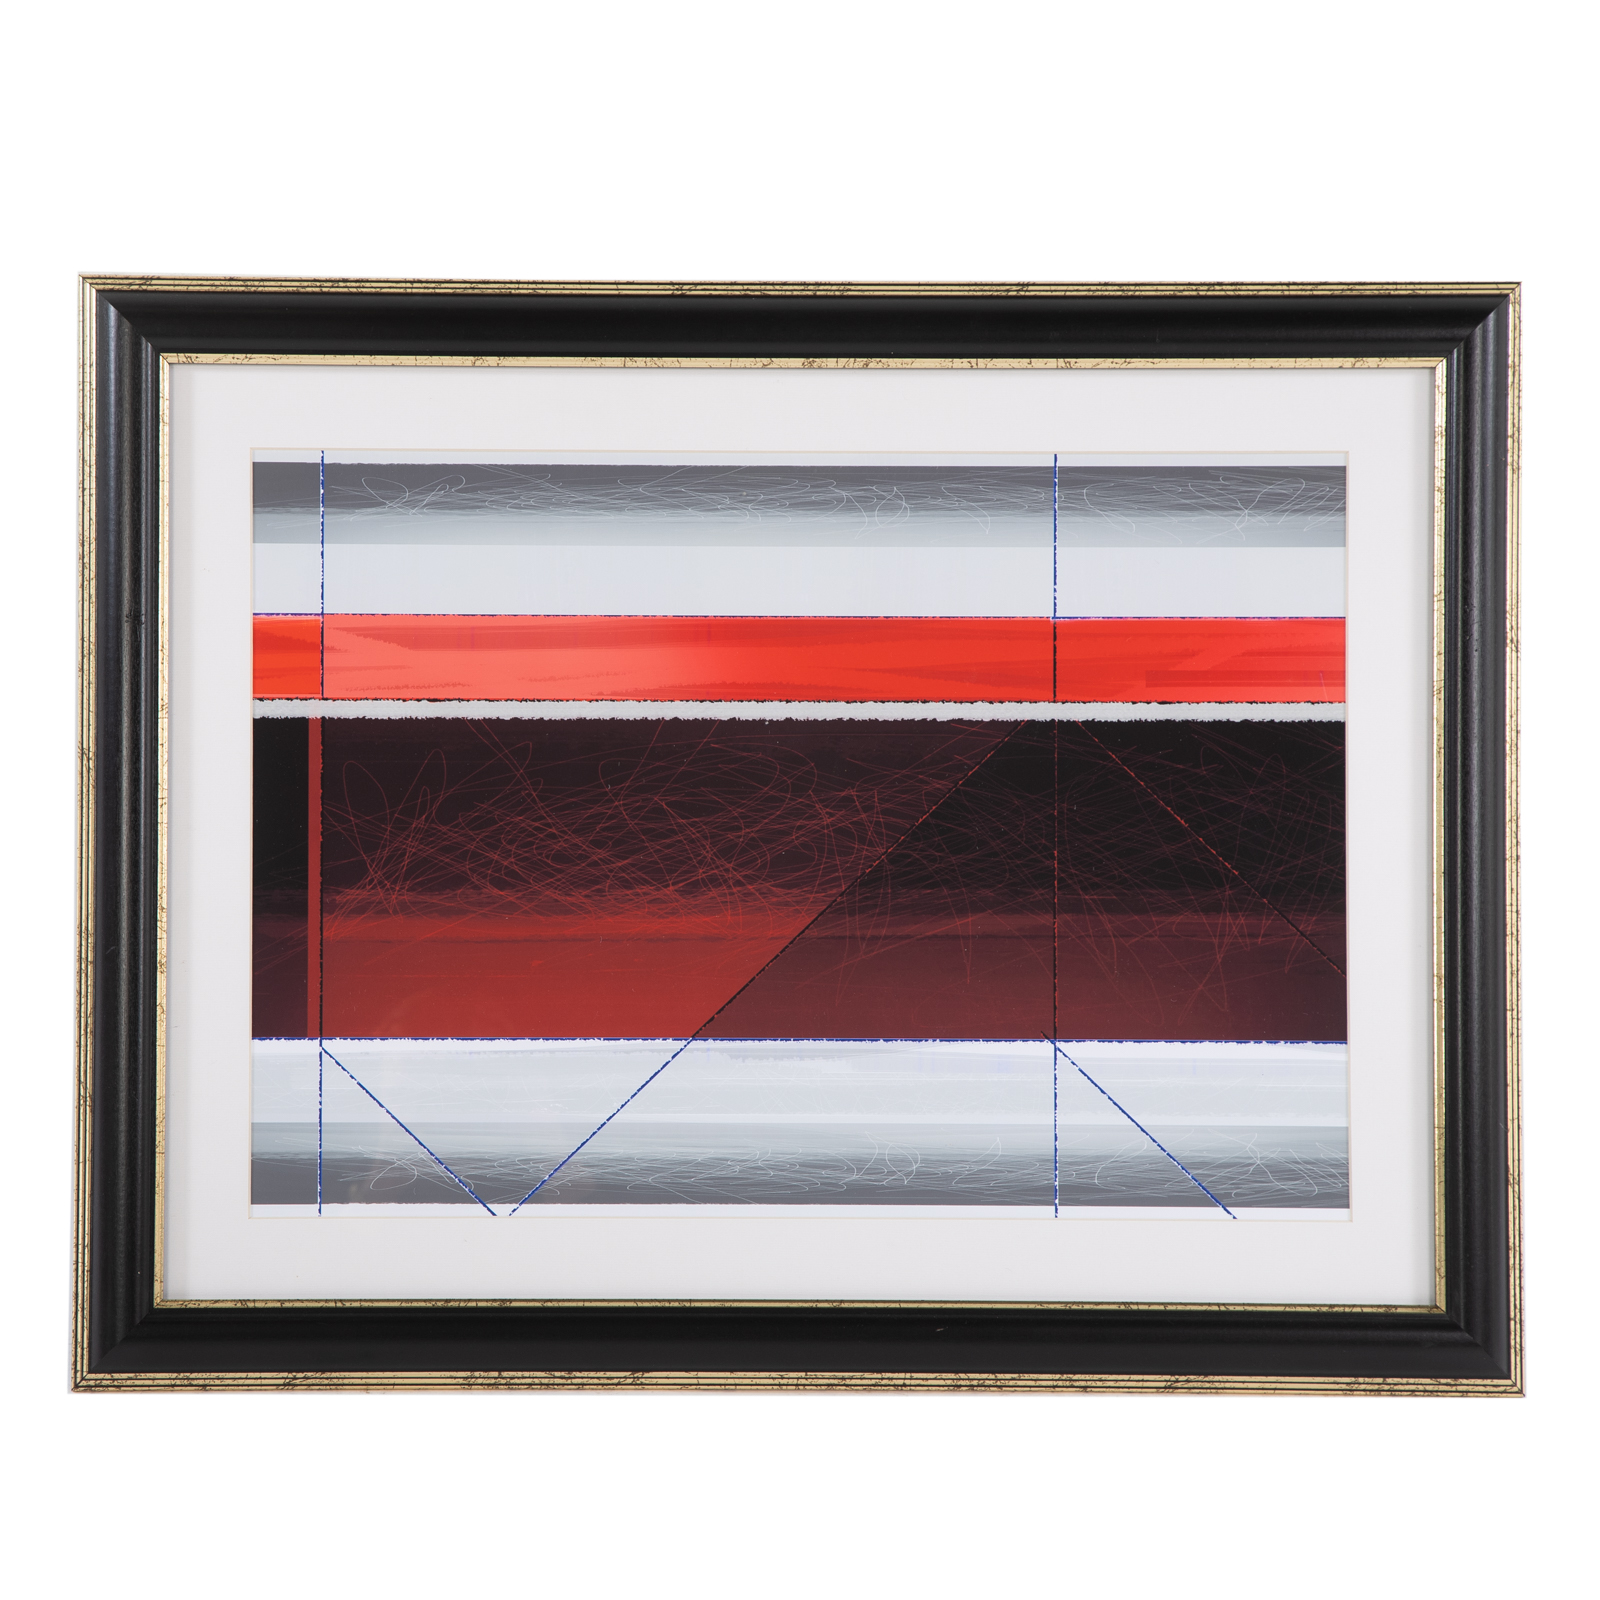 CONTEMPORARY RED SUNSET, LITHOGRAPH